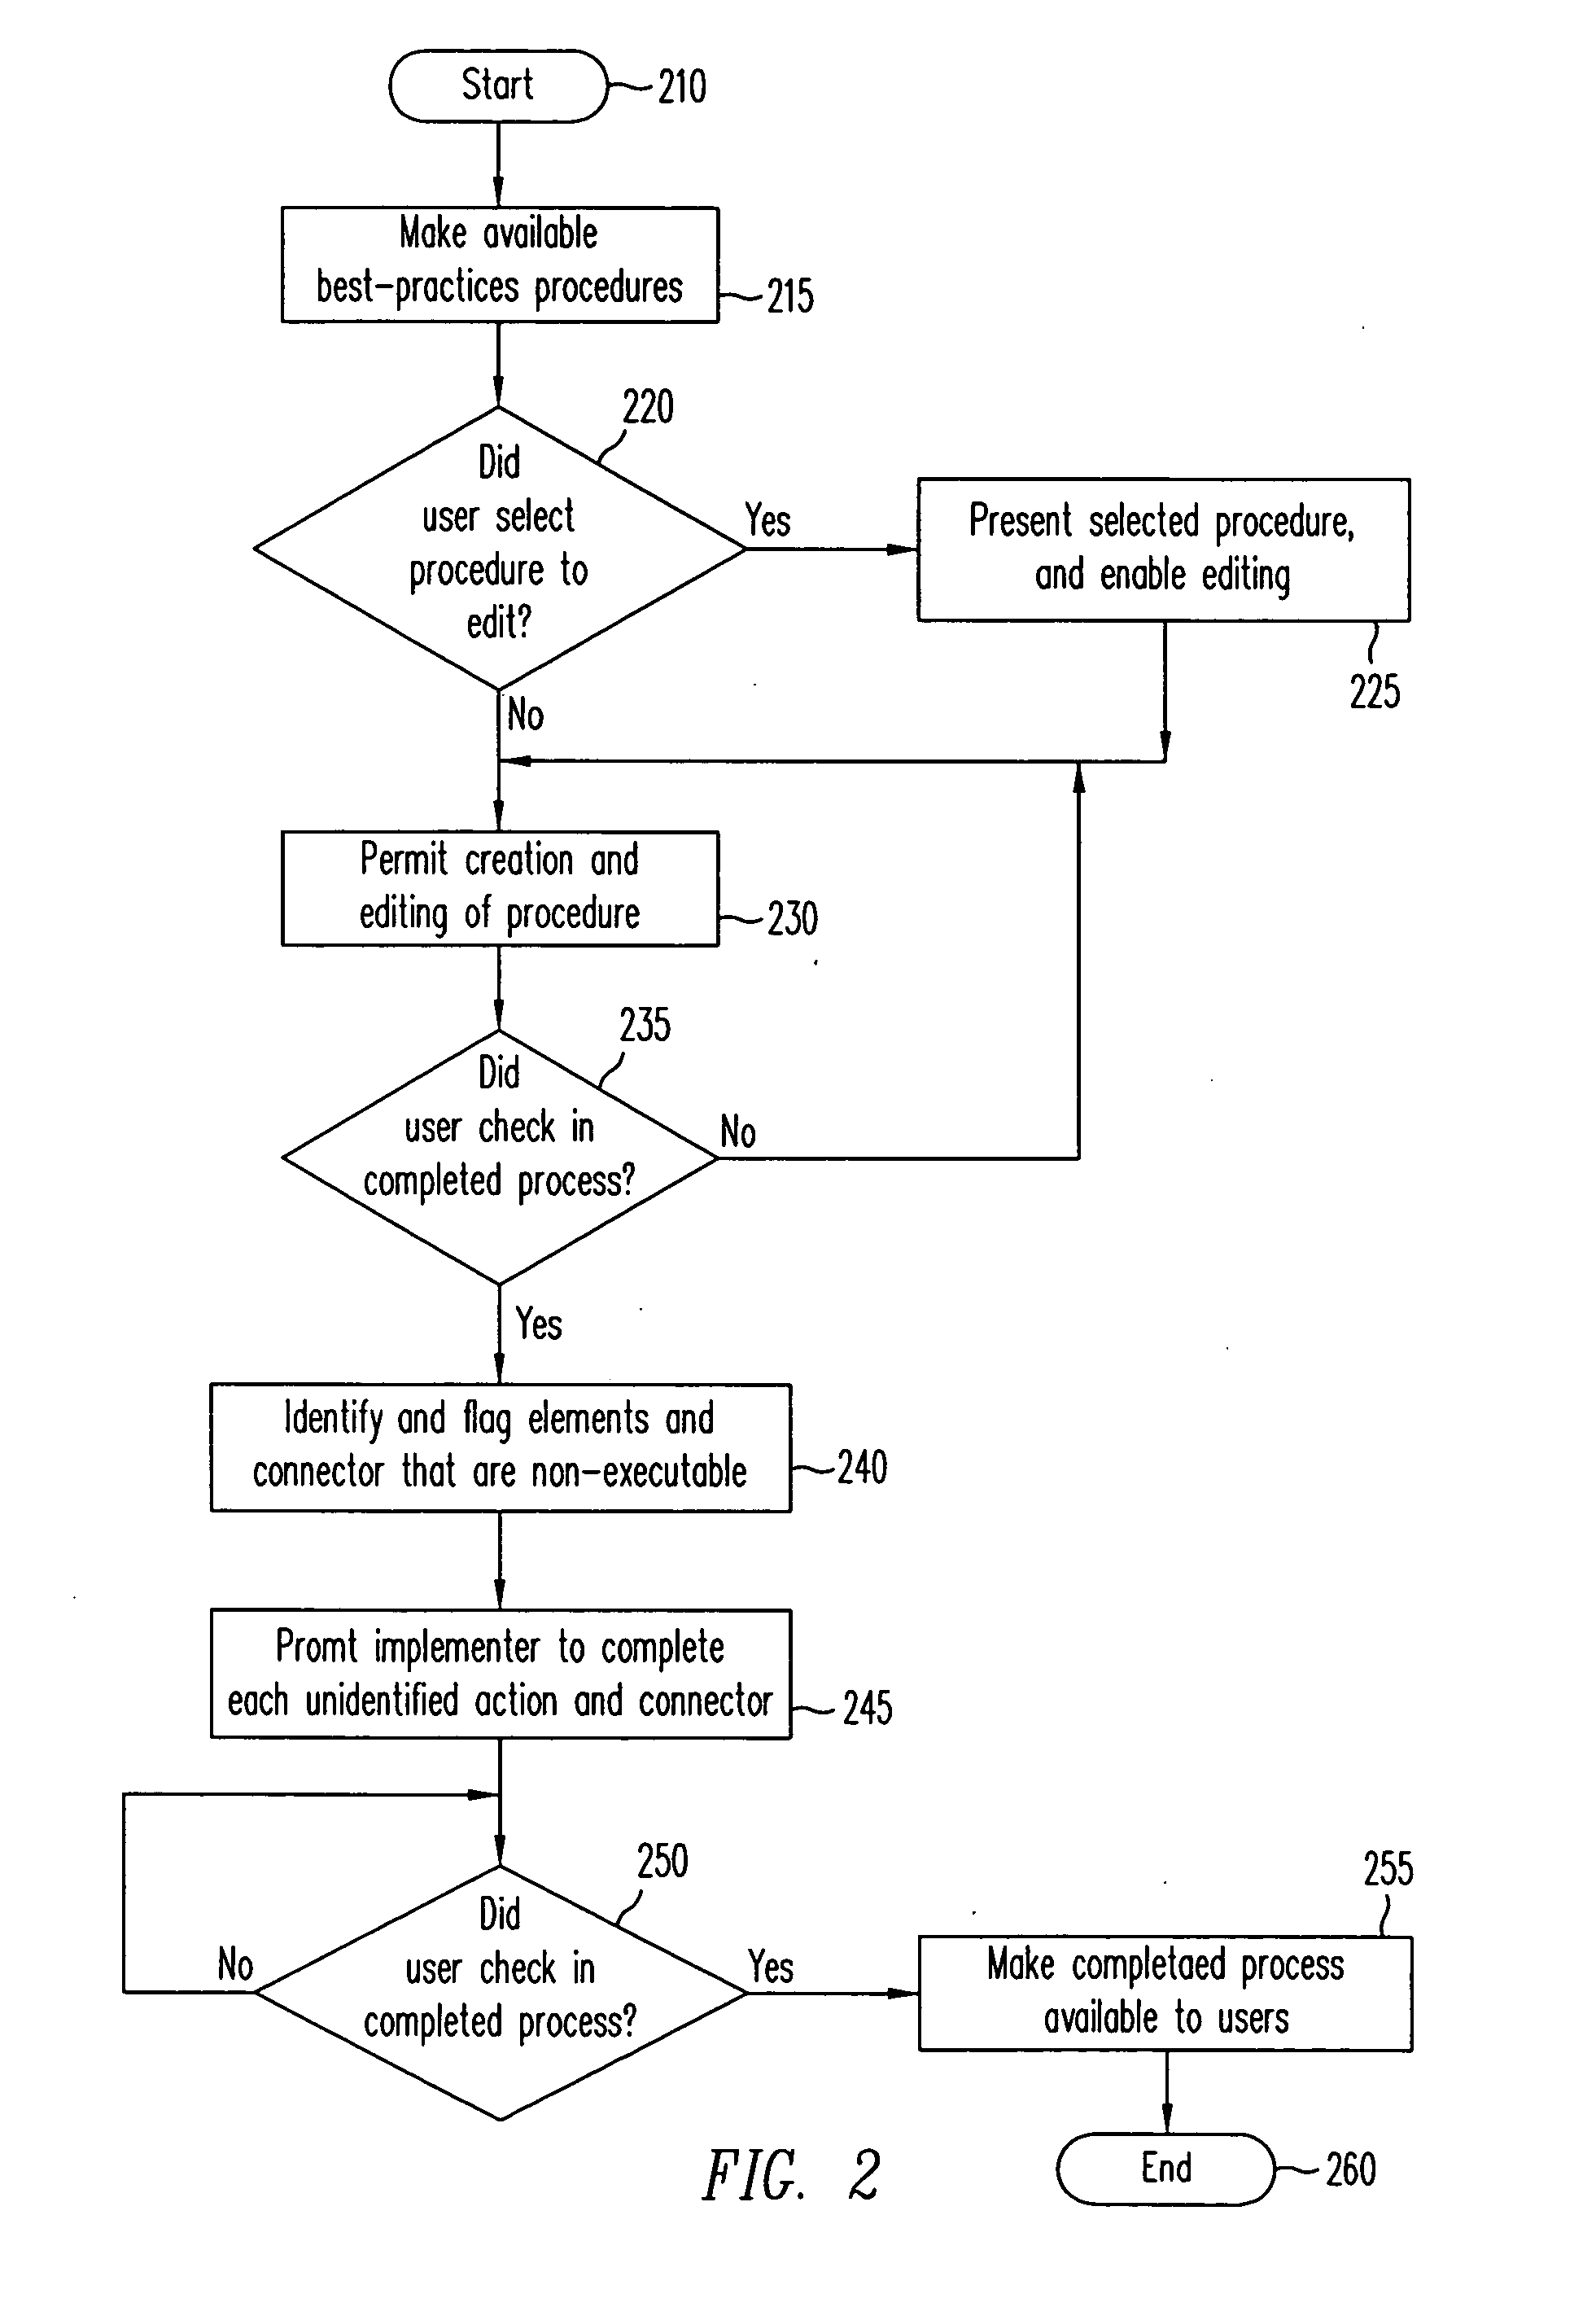 Method and apparatus to present an integrated process modeler